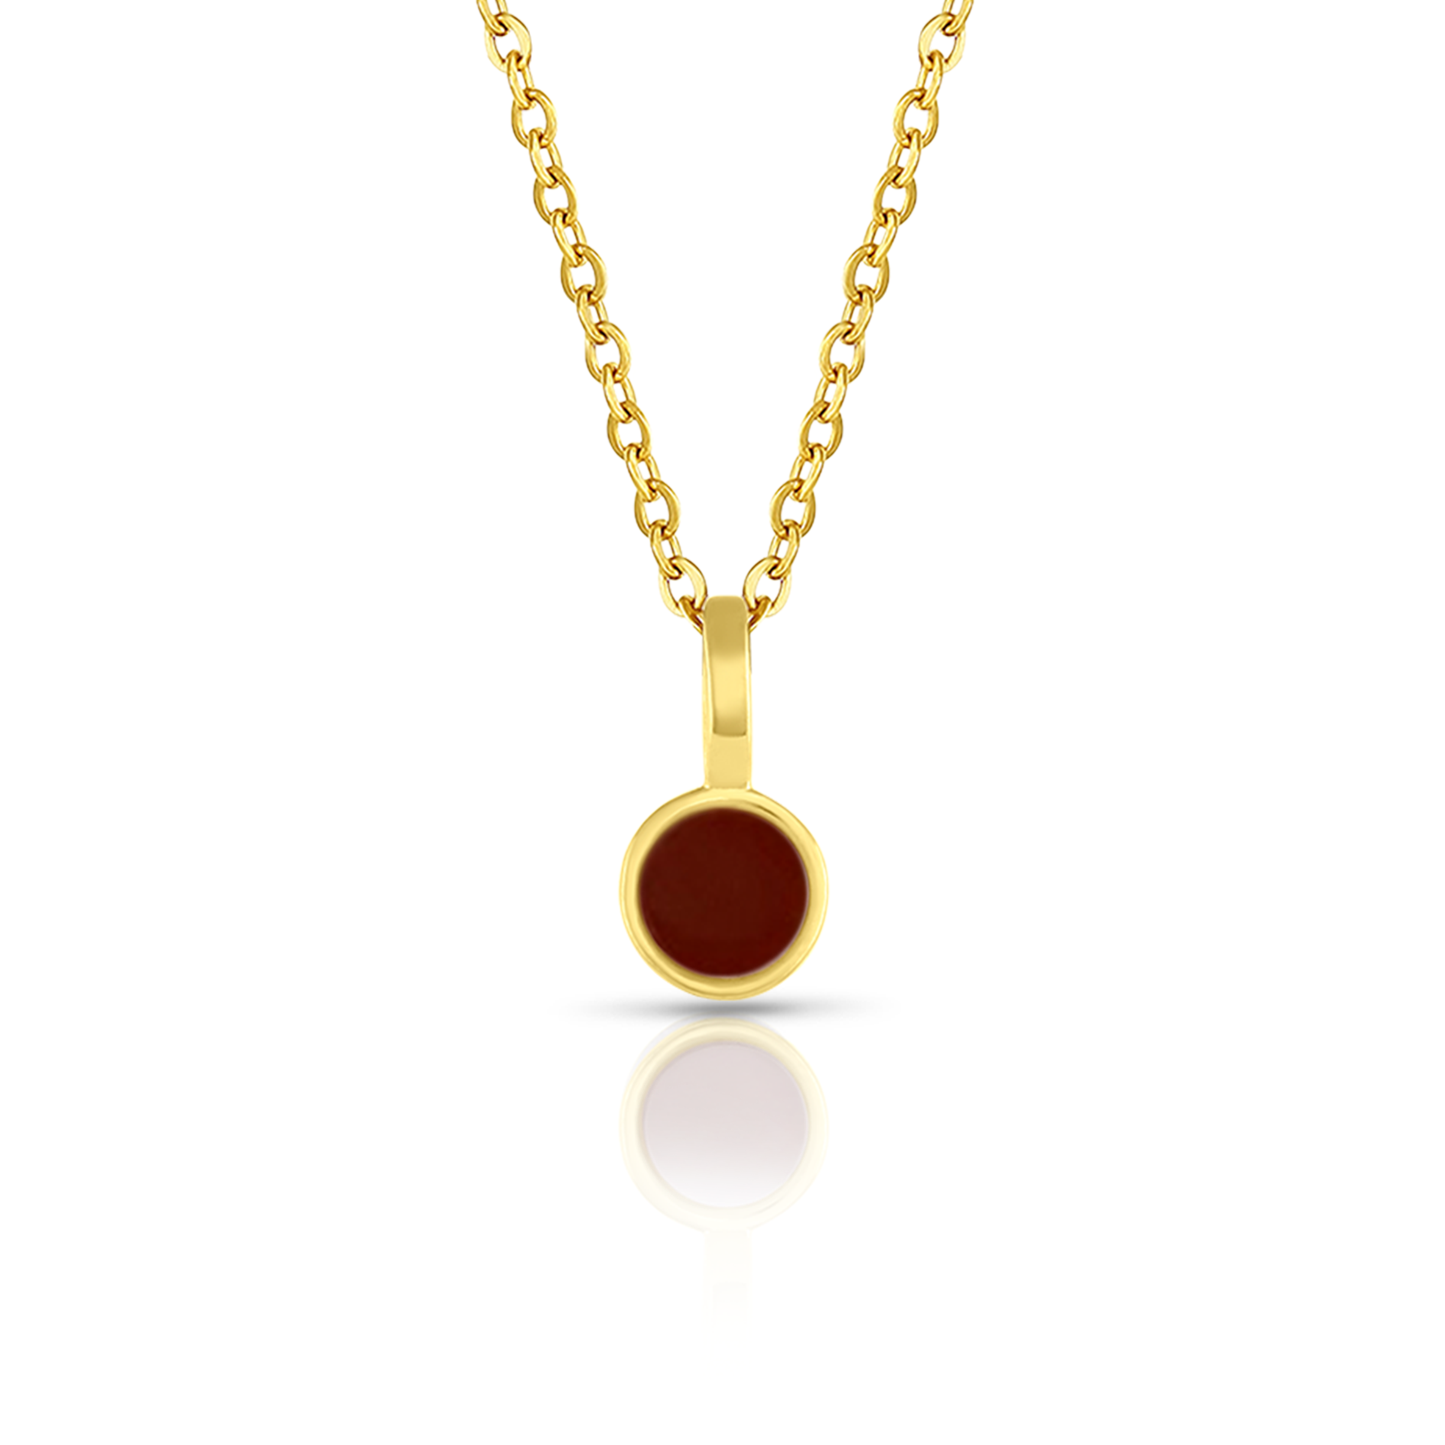 5mm Round Charm Yellow Gold plated Necklace in Red Round Natural Dolomite Gemstone made by Born to Rock Jewelry